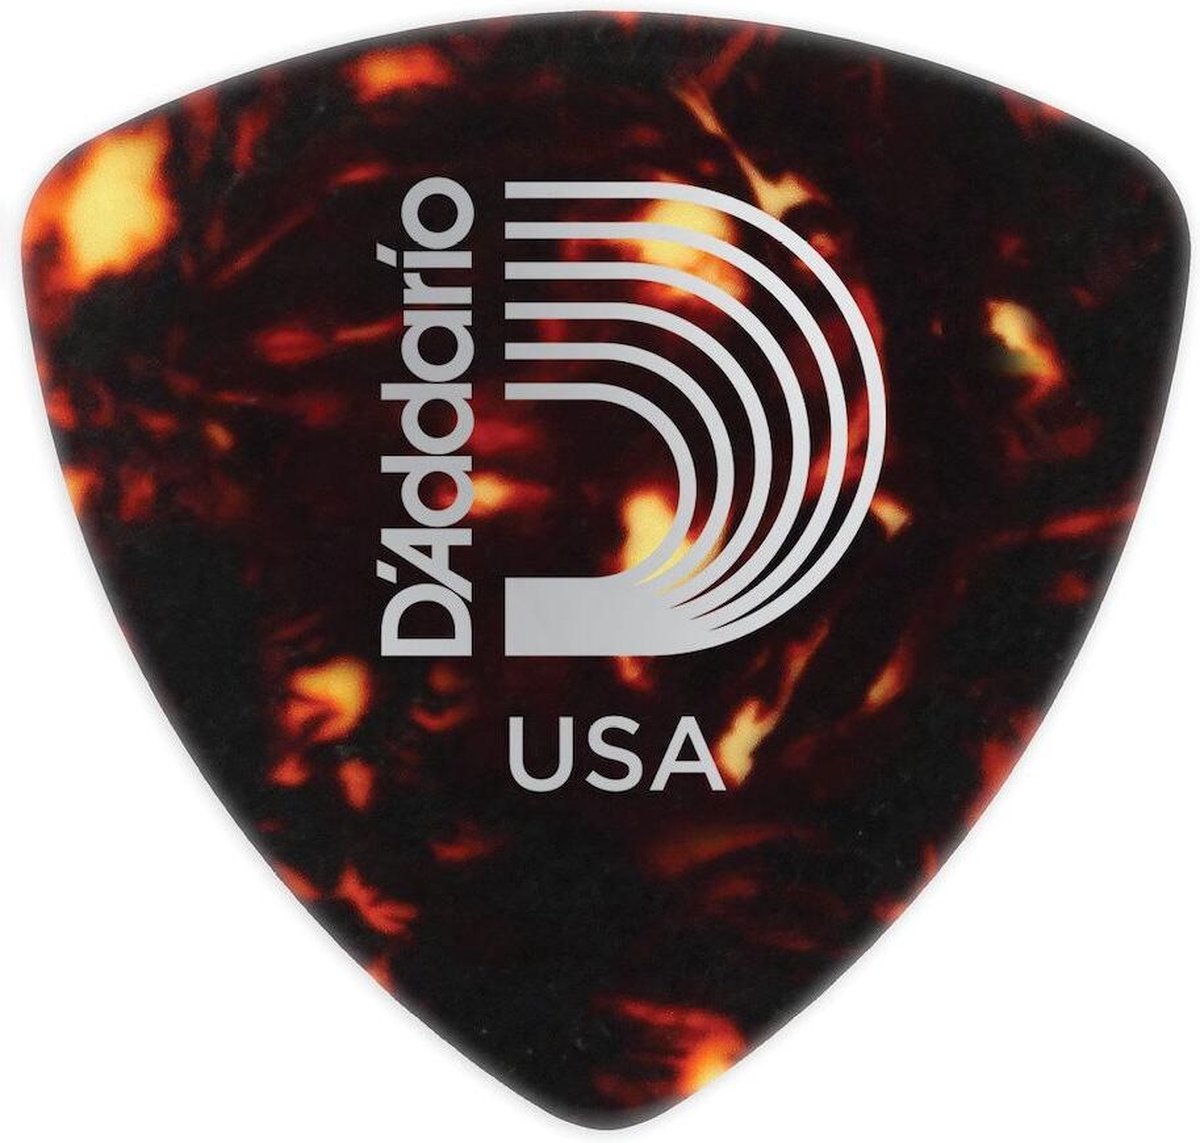 D'Addario Celluloid Wide plectrum 6-pack Thin 0.50 mm